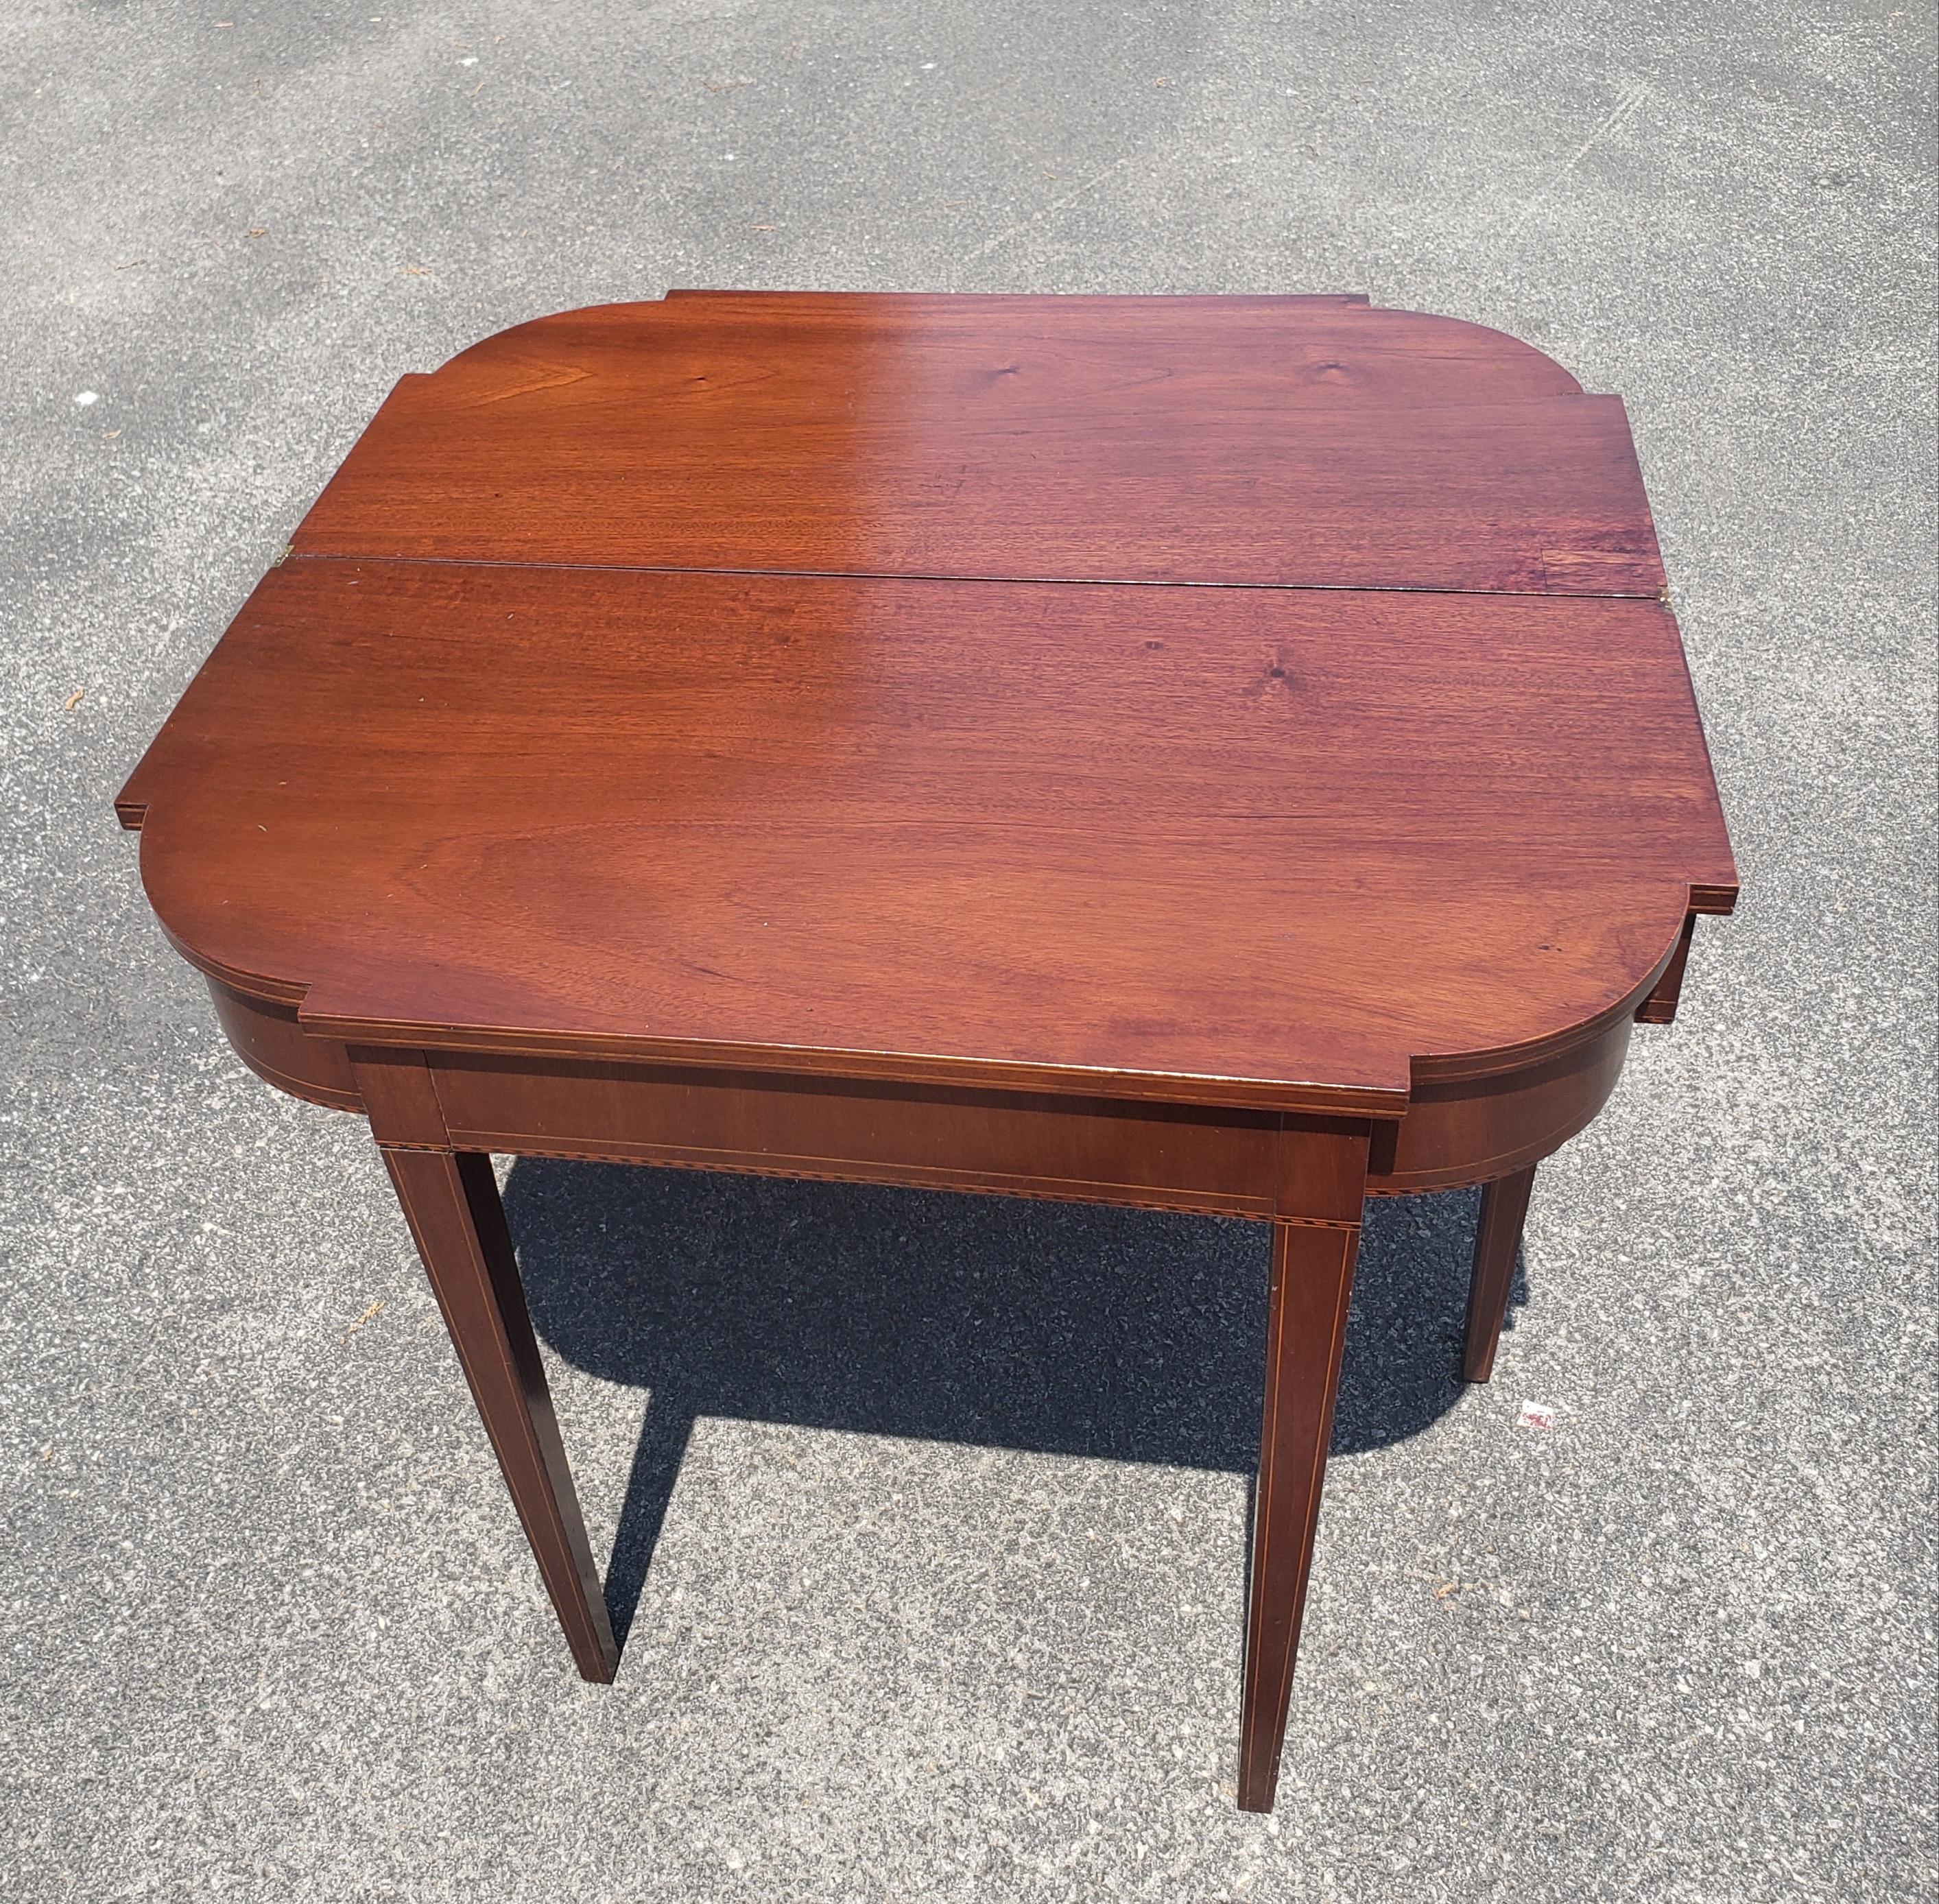 1920s Mahogany and Satinwood Inlaid Federal Style Fold-Top Console or Card Table In Good Condition For Sale In Germantown, MD